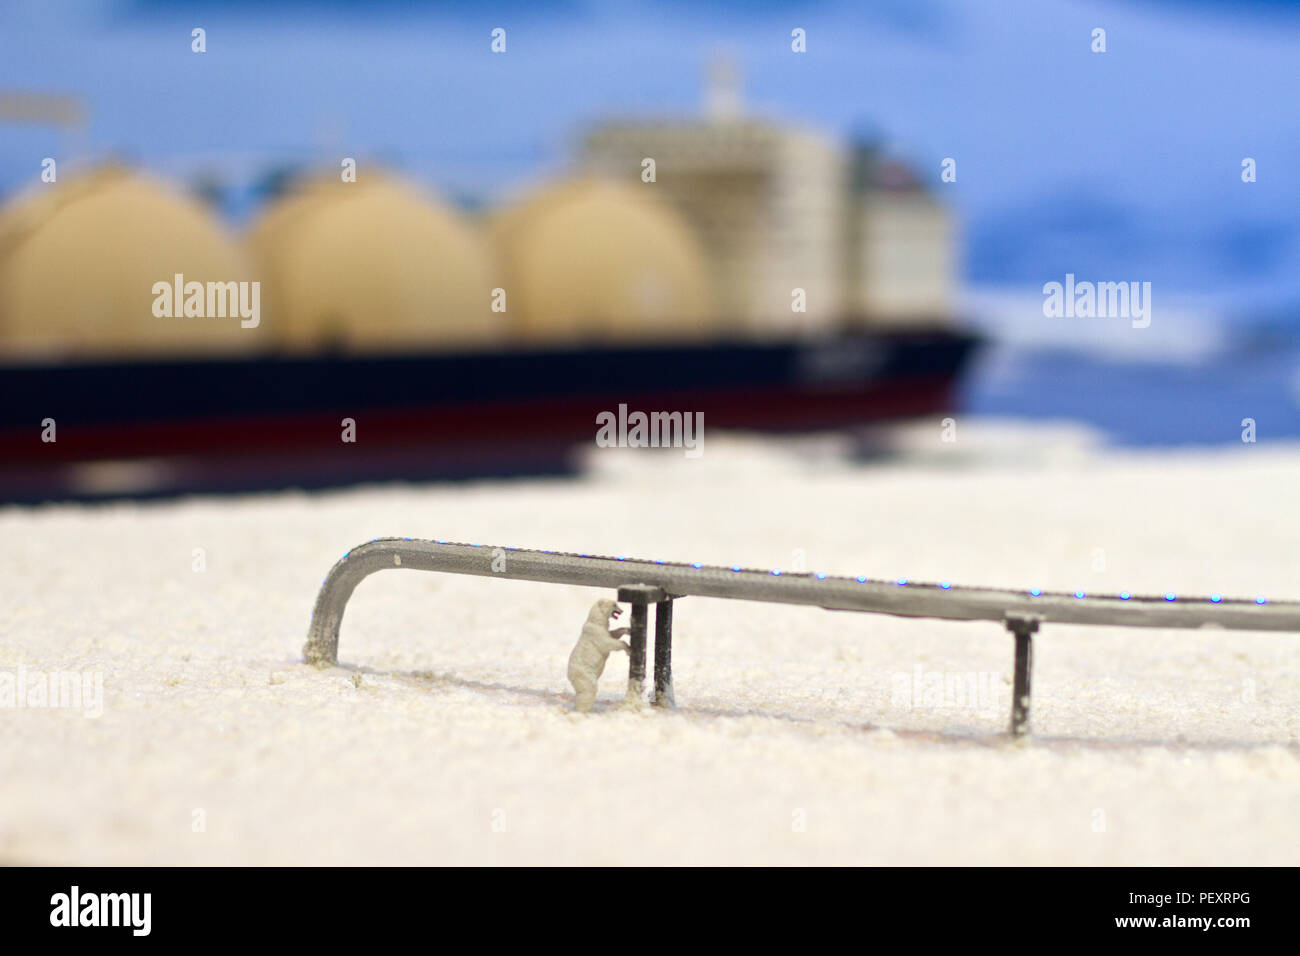 LNG carrier reproduction at reduced size Stock Photo